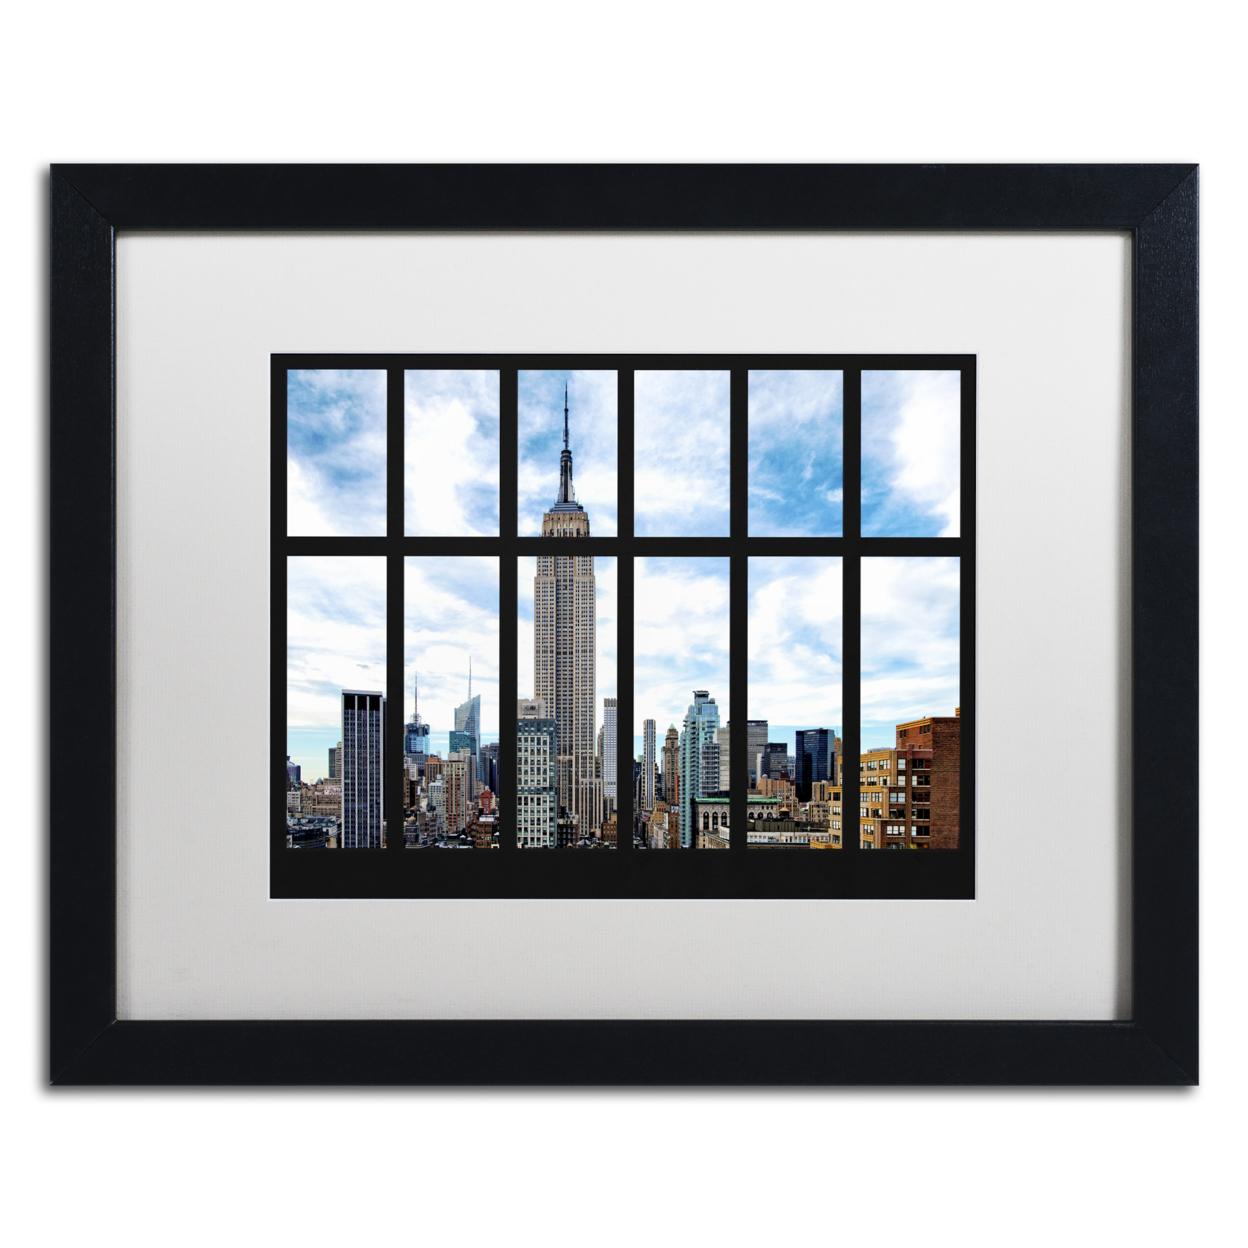 Philippe Hugonnard 'Empire State Building View' Black Wooden Framed Art 18 X 22 Inches